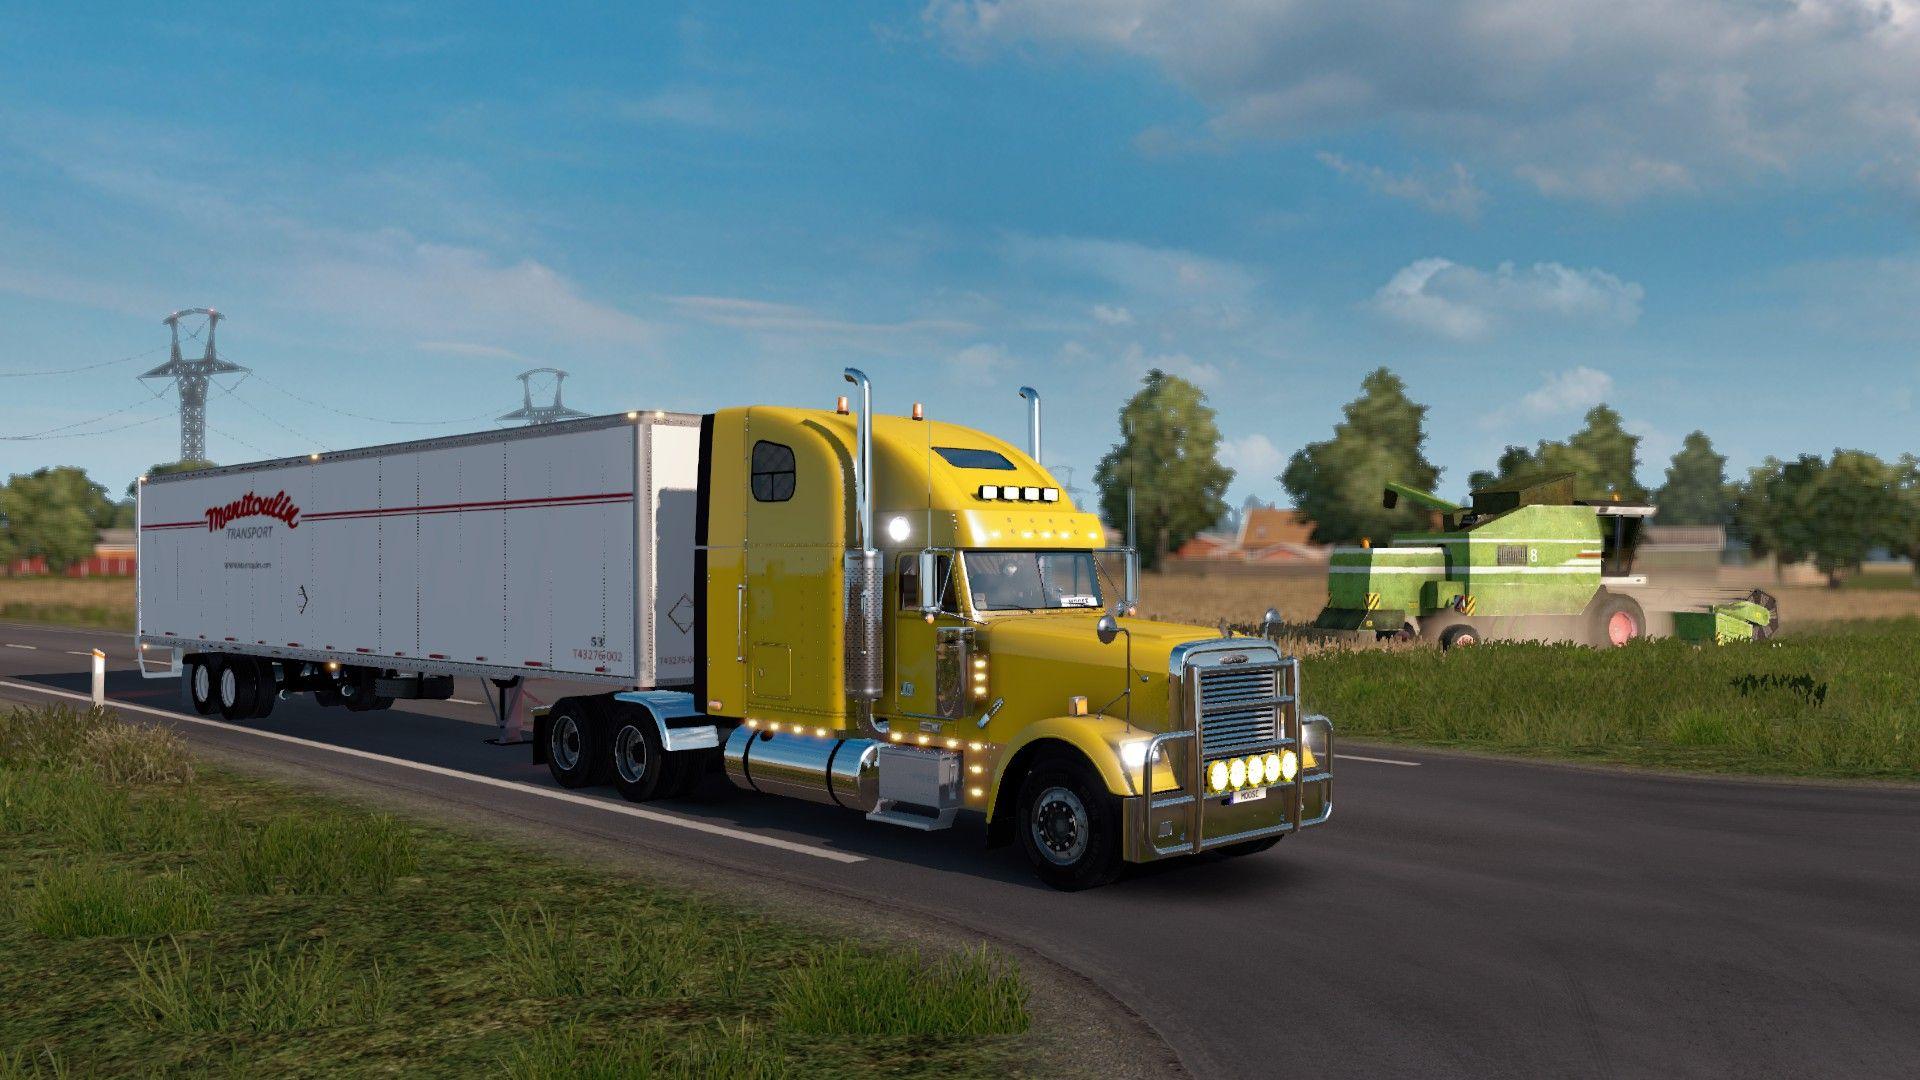 How long ATS trailers will be? And more Image! Truck